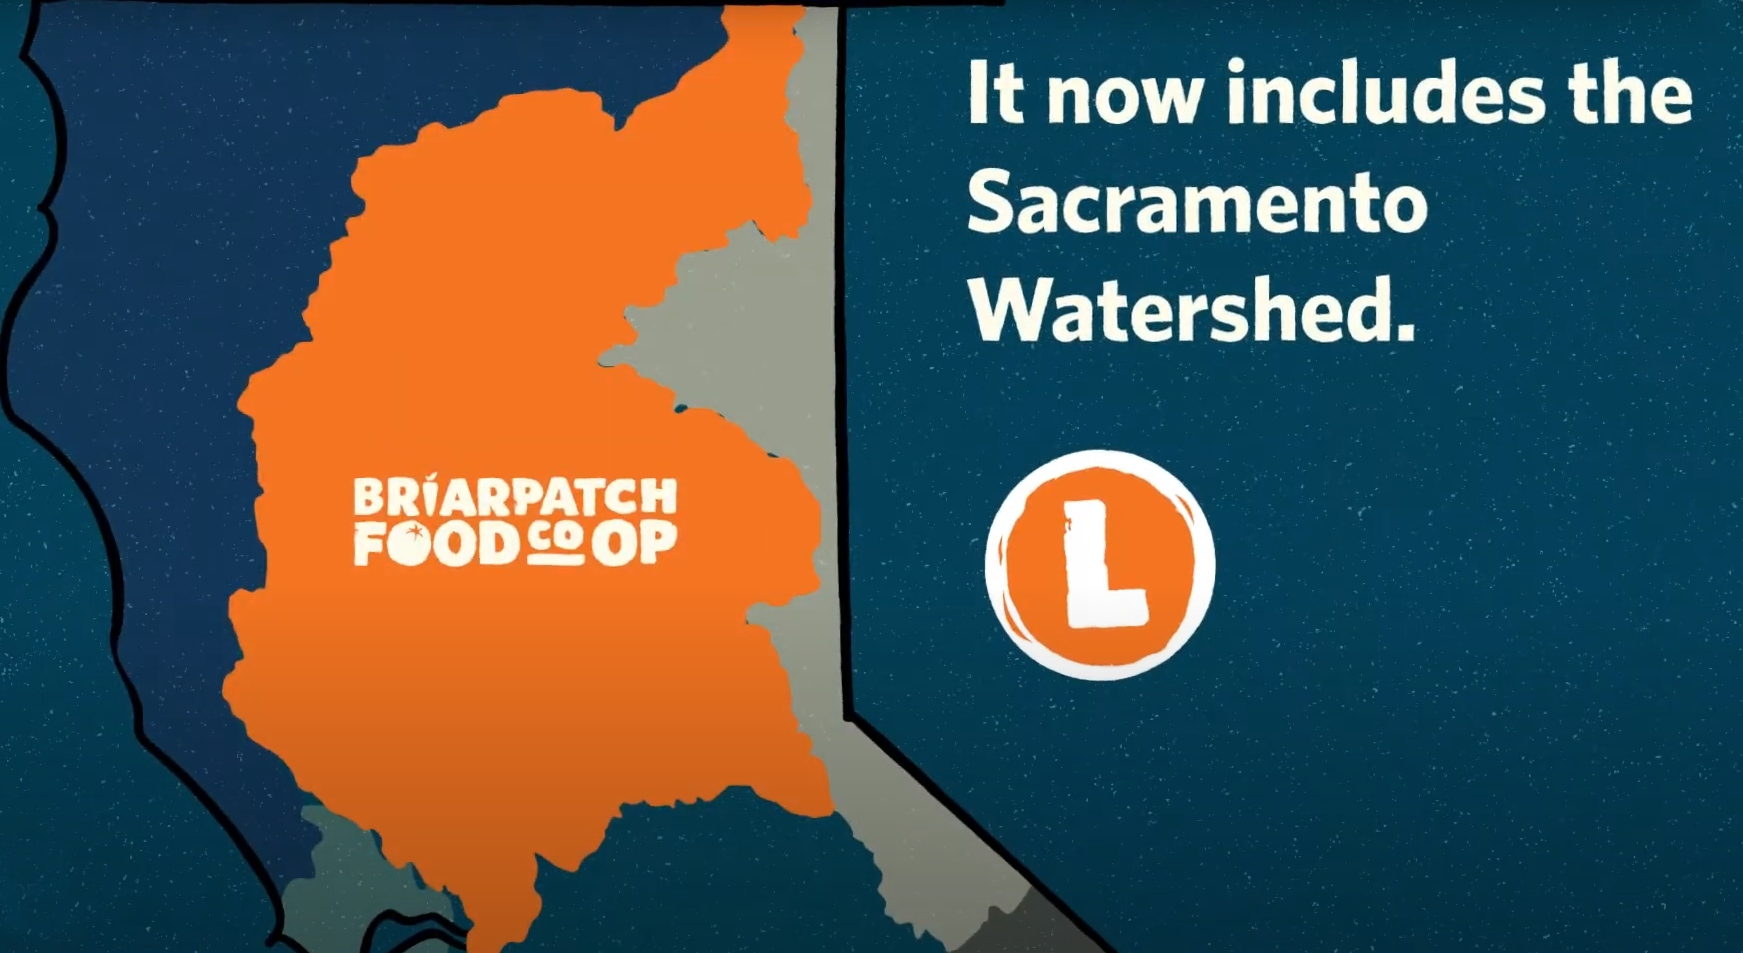 We define local using our watershed